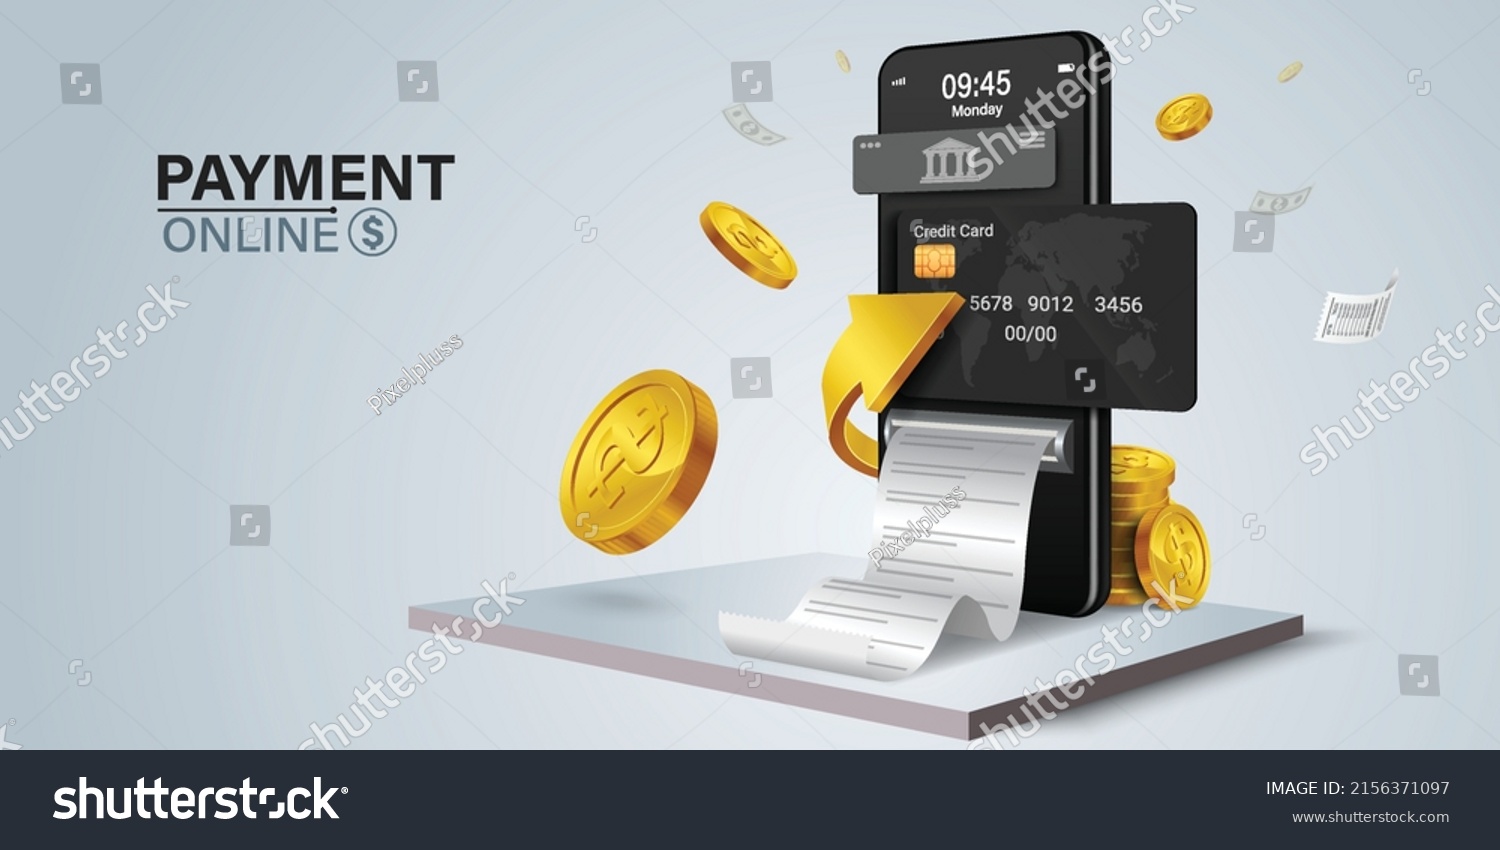 The credit card is on the smartphone and there are coins around it.Mobile payment concept without ATM or bank.
Cashback via mobile application or via credit card.
Paying bill using mobile phone bill. #2156371097